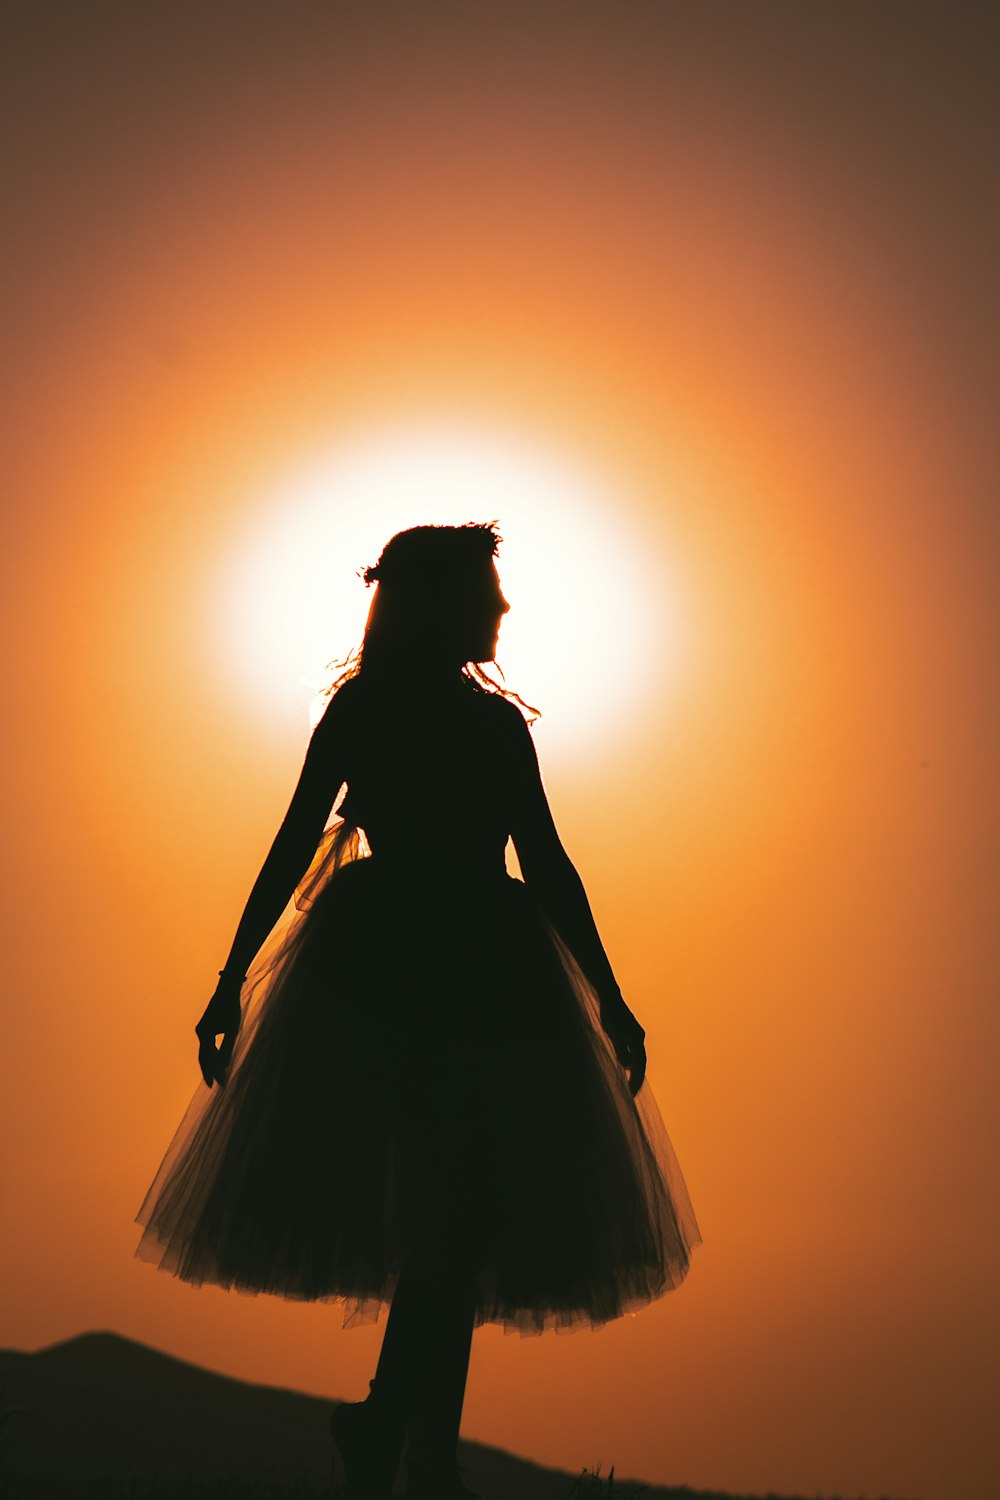 a silhouette of a woman in a tutu skirt